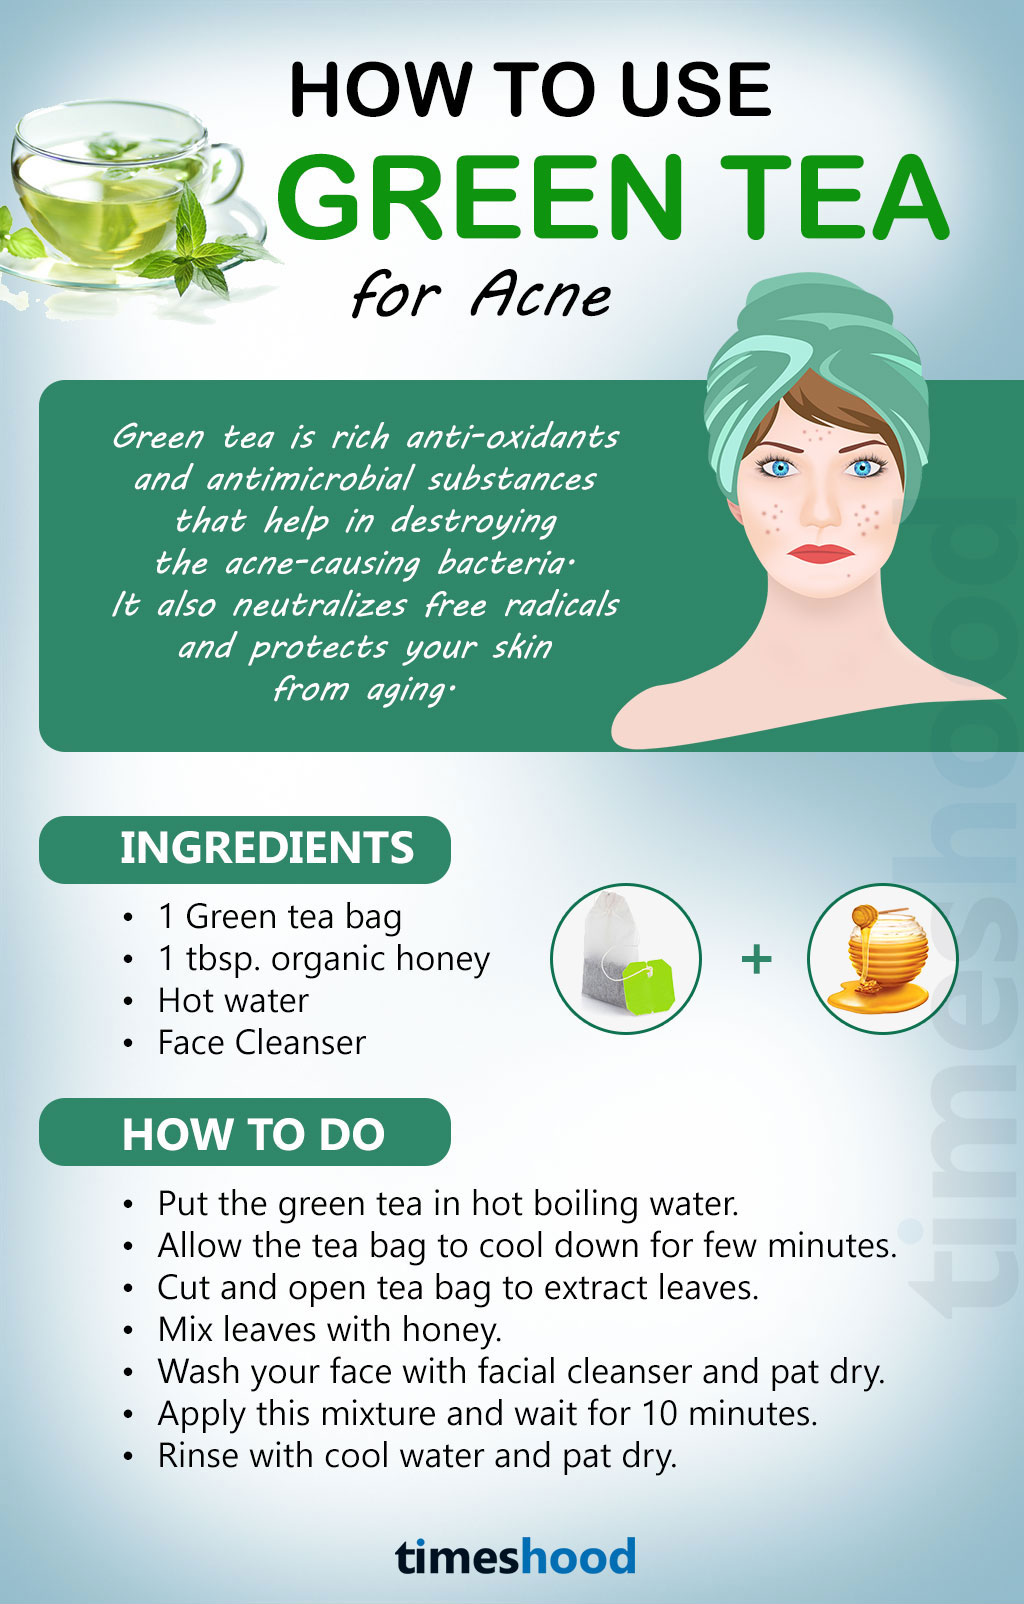 How to use green tea to get rid of acne and pimples. Try green tea leaves for acne. Effective home remedies for acne. Anti-acne remedies for face pimples. 